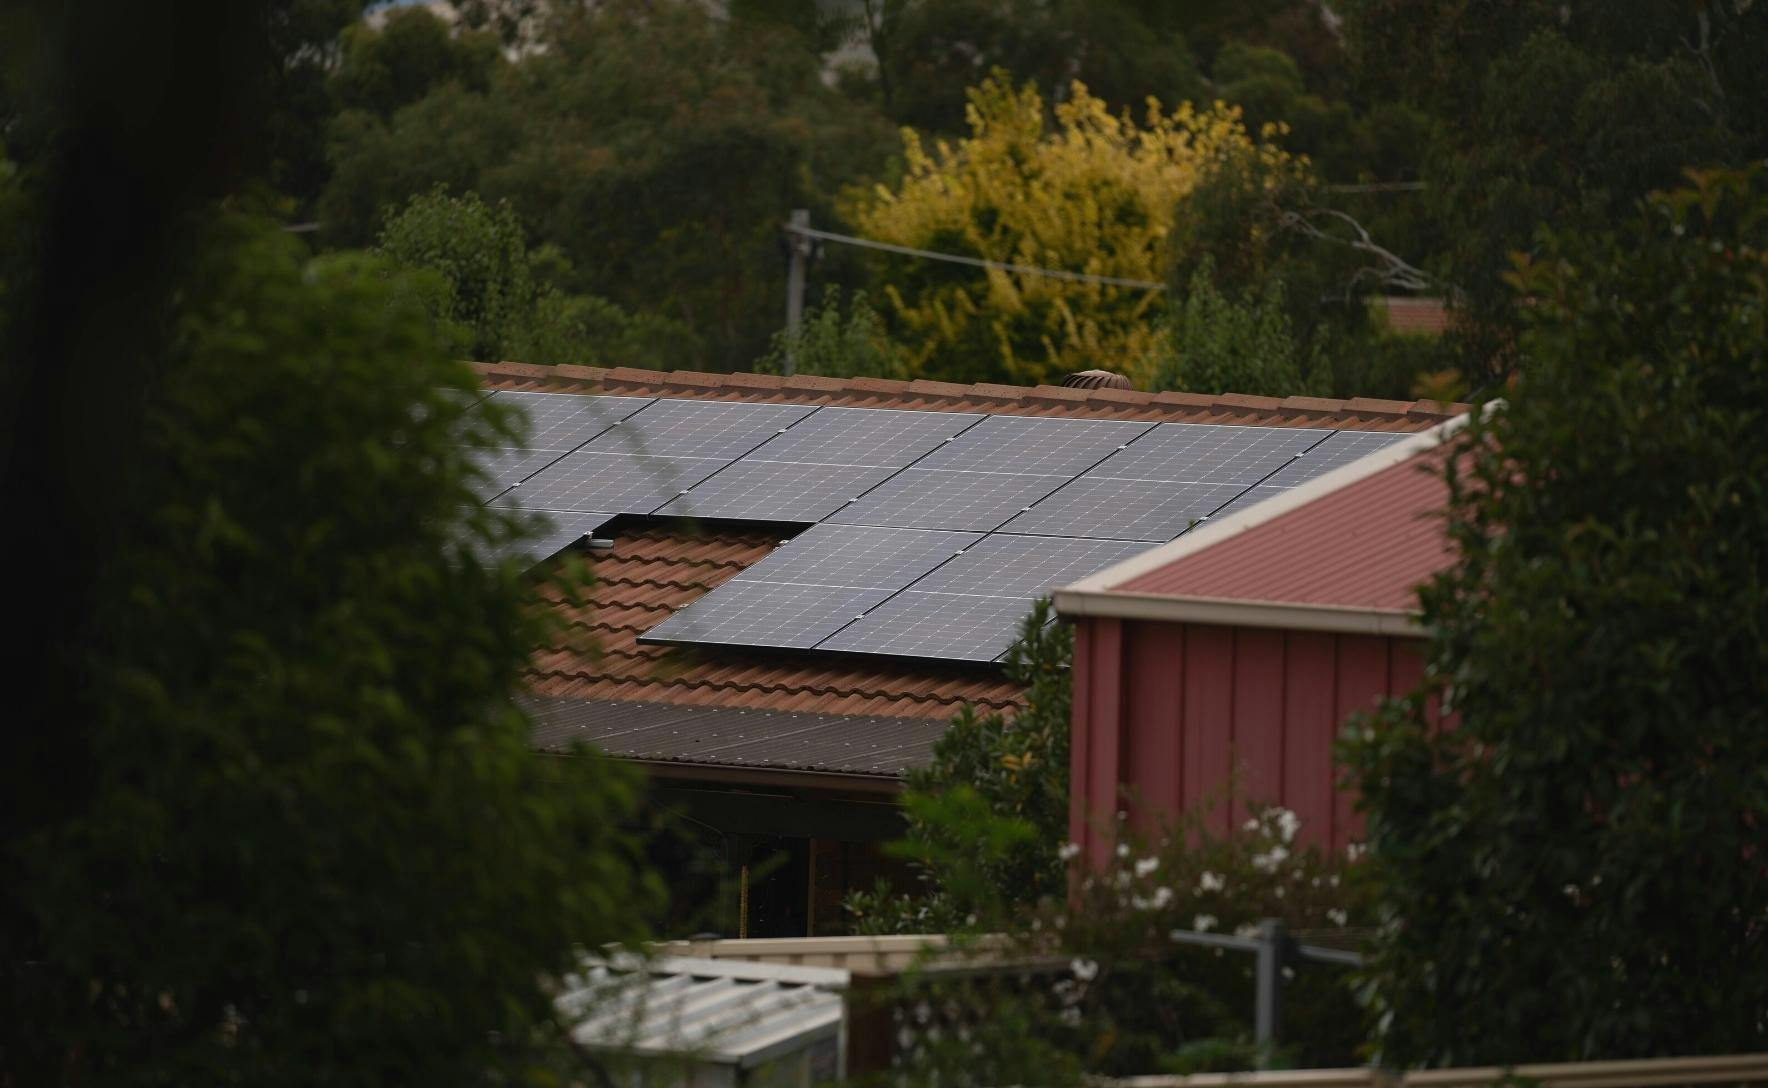 Solar panels on a red roofed house. Dark green trees frame the photograph